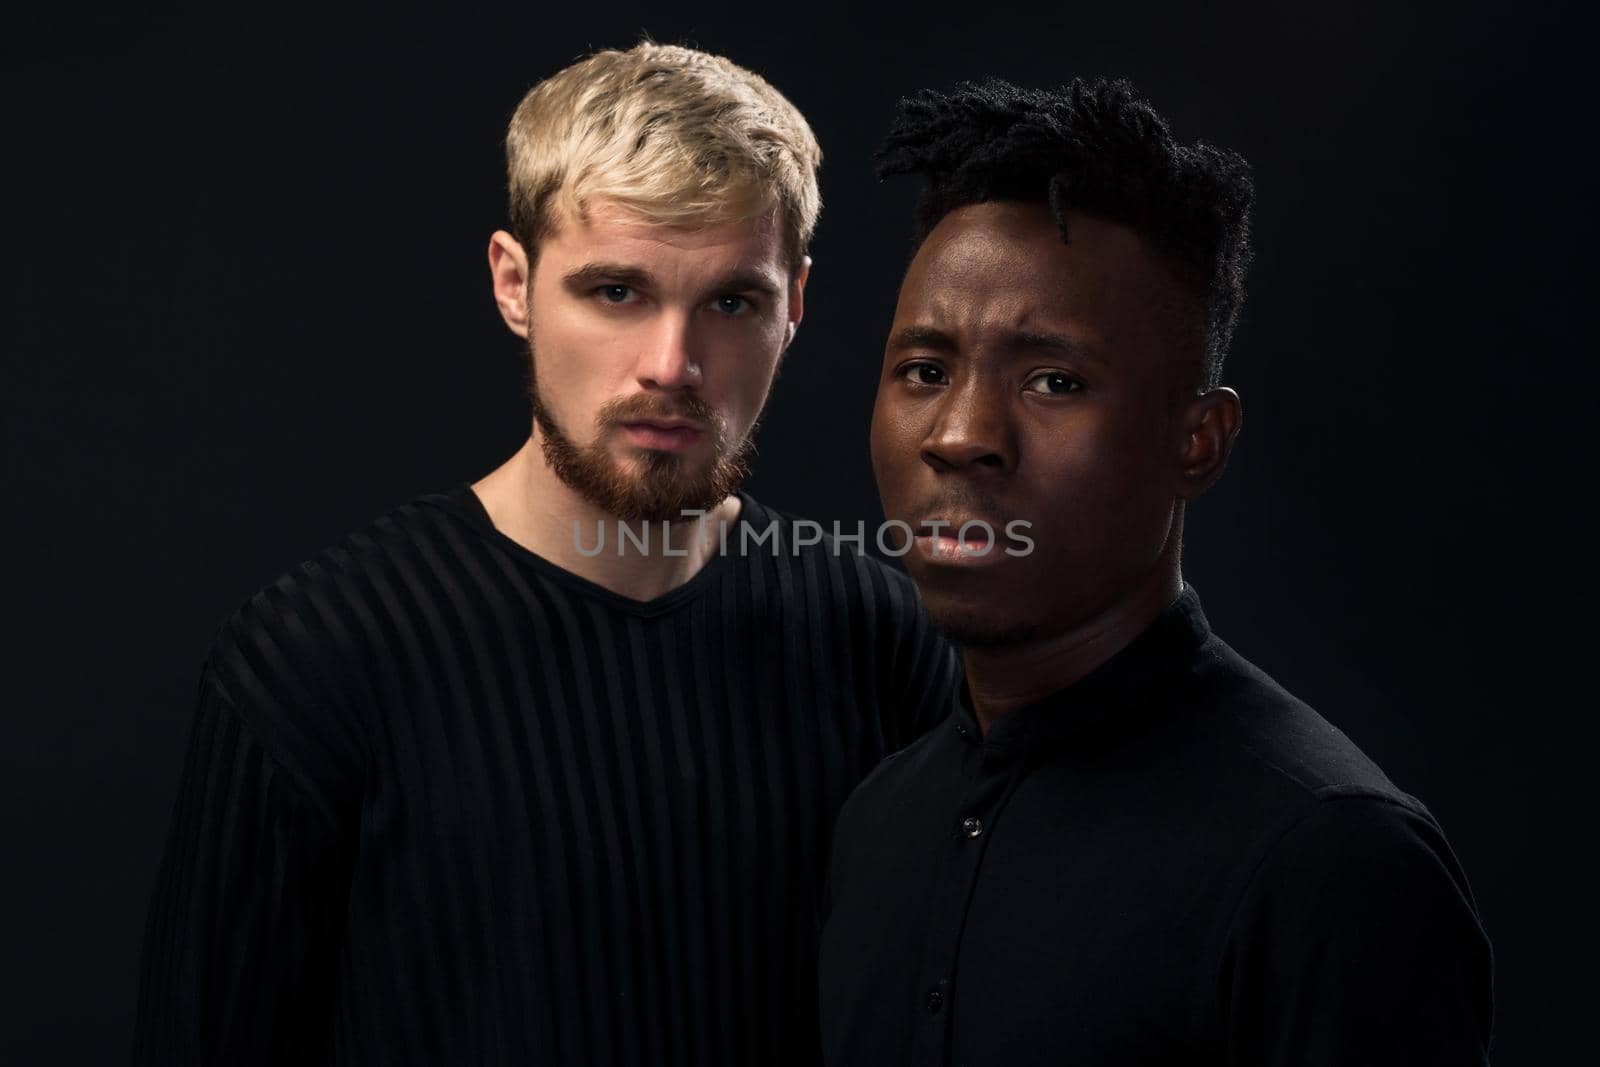 Portrait of two young african american and caucasian men standing over black background. International friendship concept. Studio shot